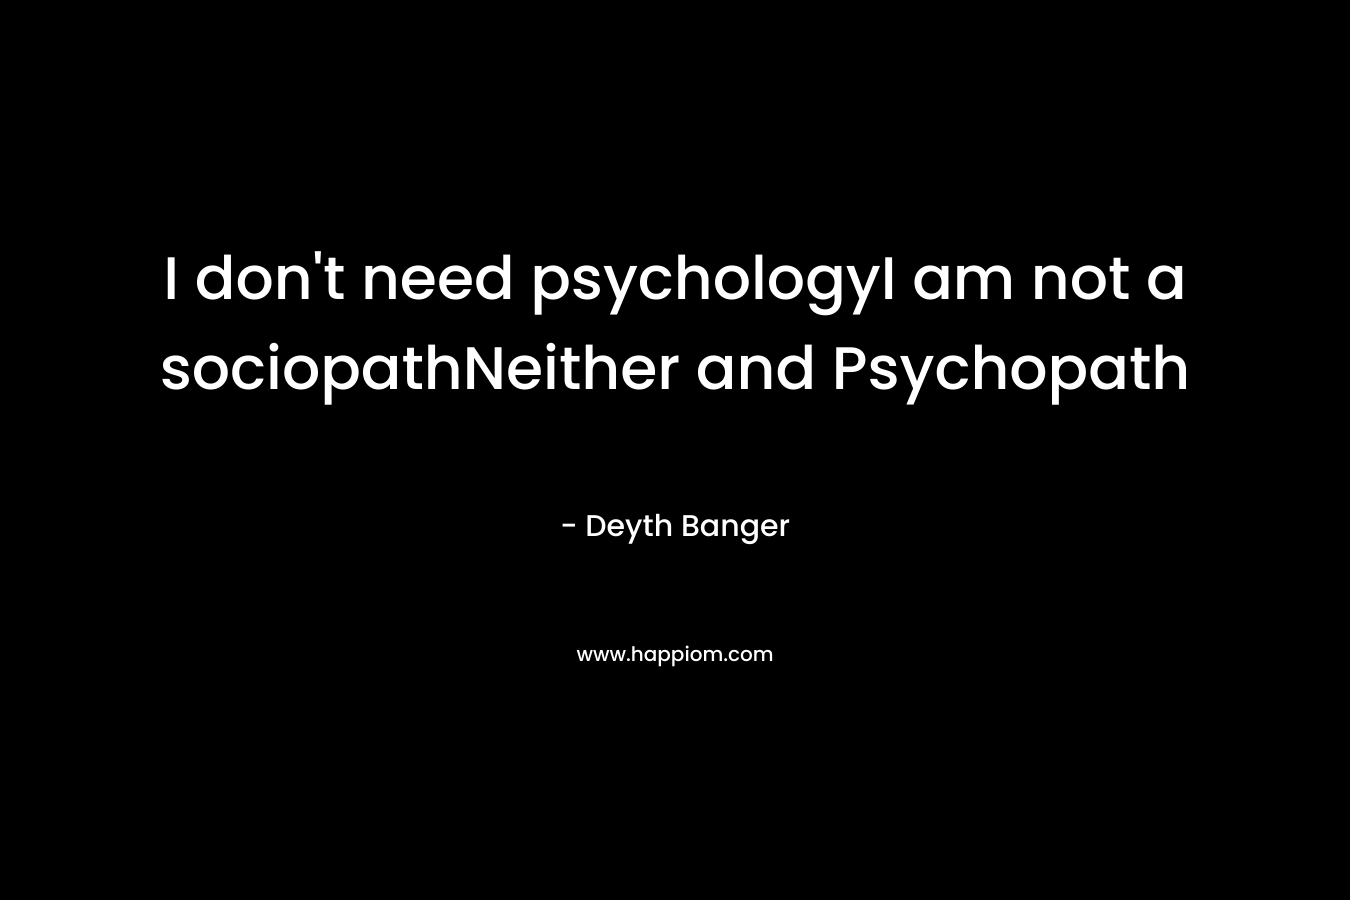 I don't need psychologyI am not a sociopathNeither and Psychopath